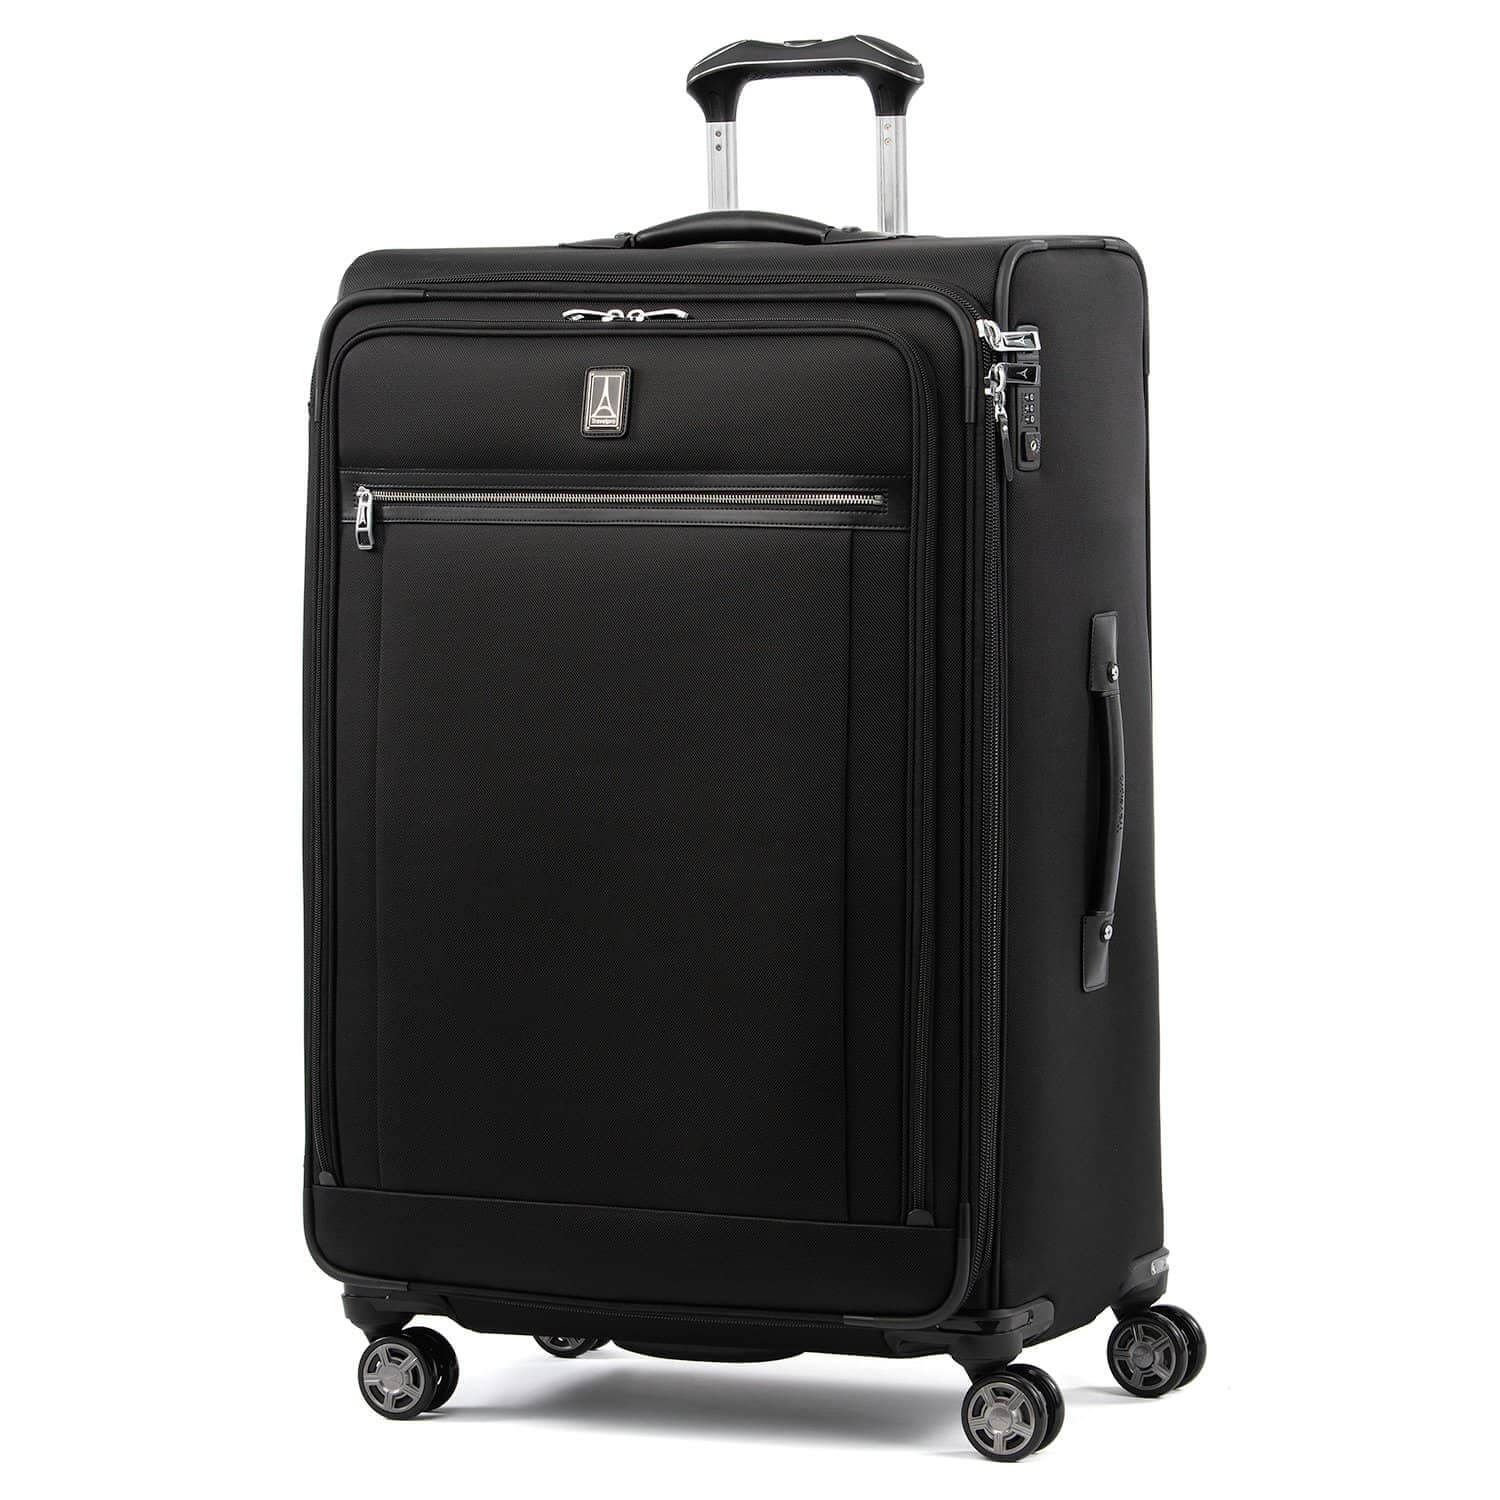 travelpro platinum elite 29 checked suitcase black suitcase black wheels silver zippers black and silver handle front zippered compartment with travelpro logo